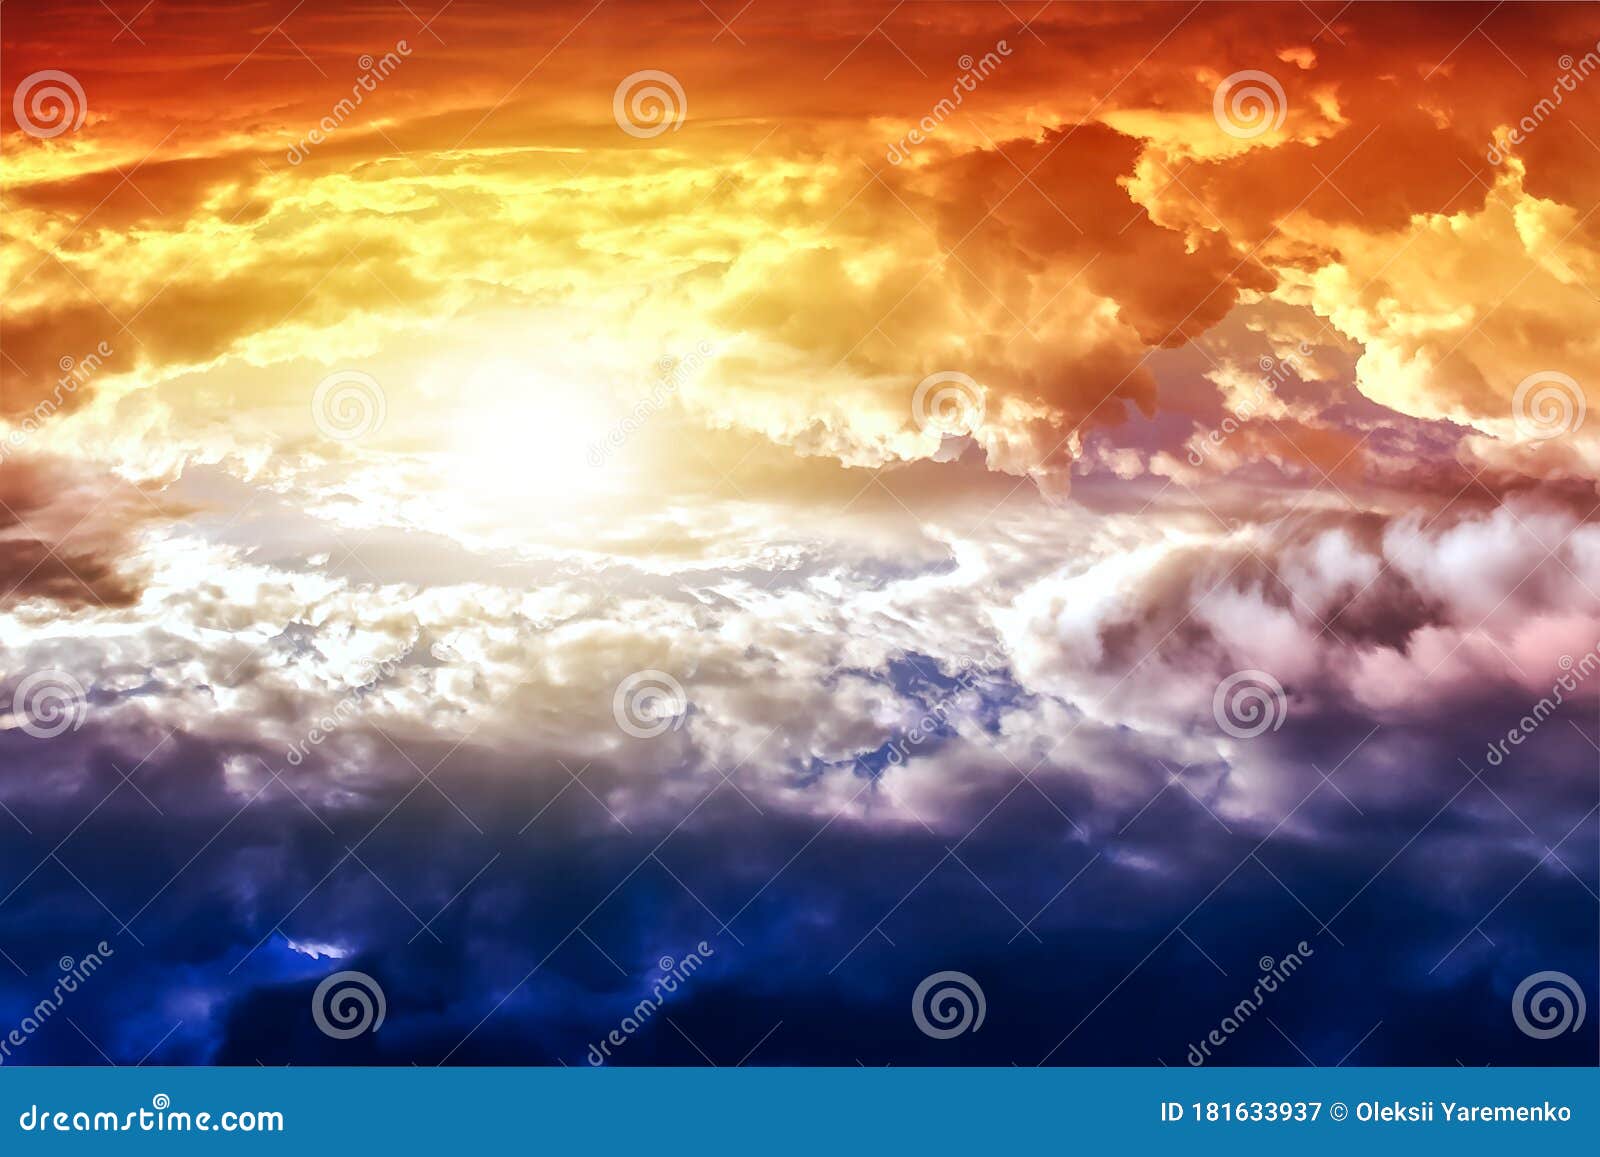 beautiful heavenly landscape with the sun in the clouds